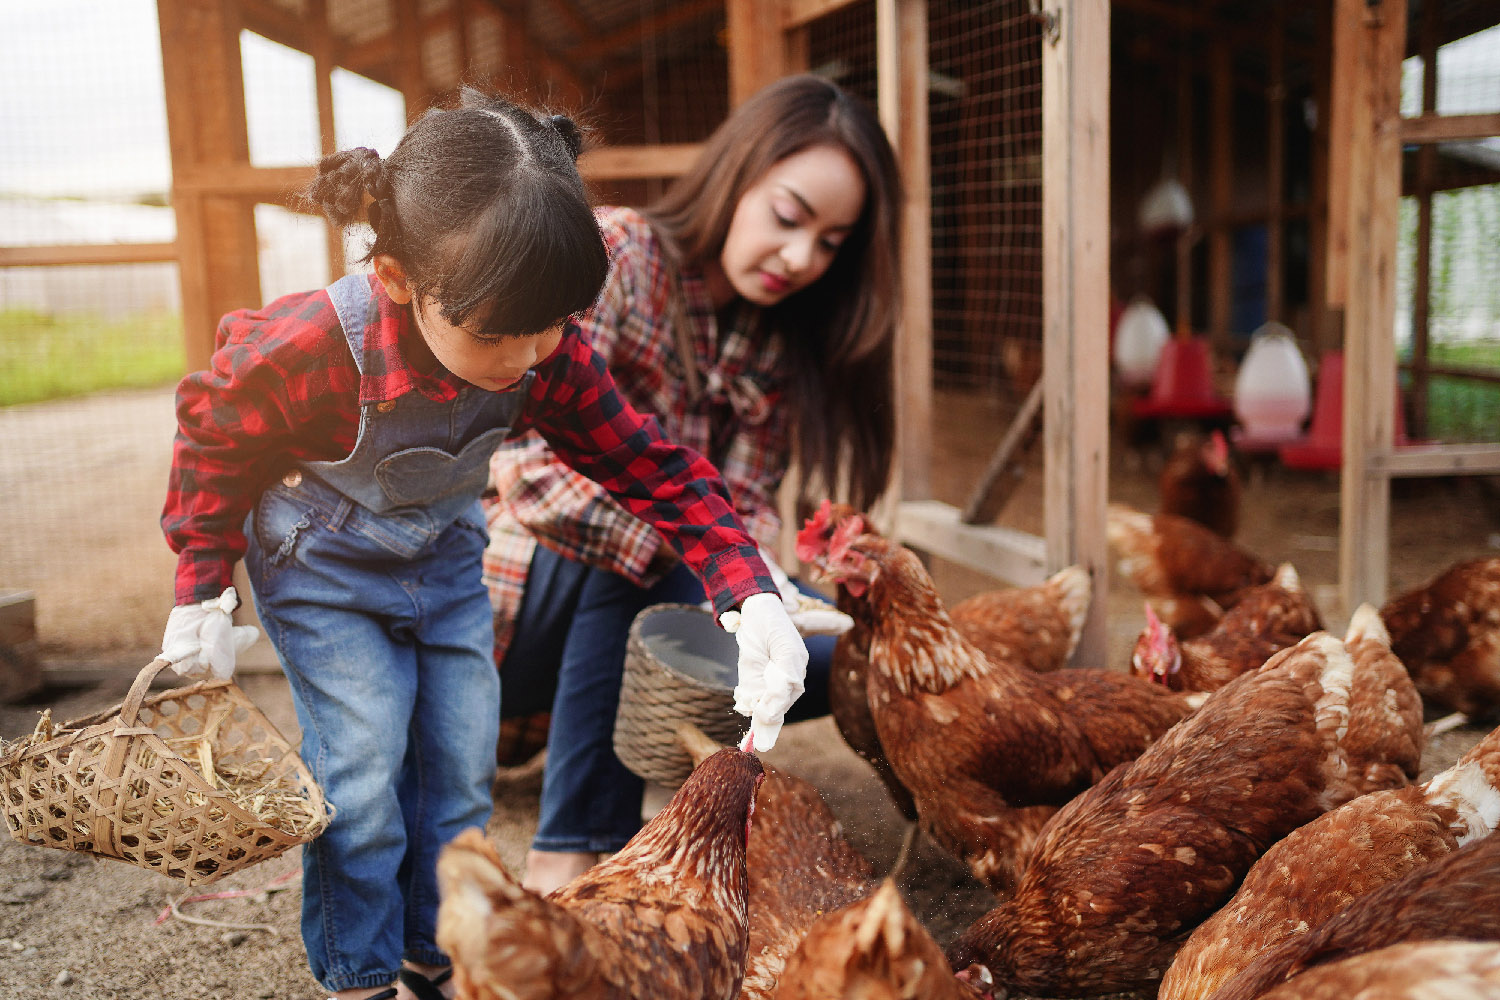 Mother and daughter feed a flock of reddish-brown chickens grain.